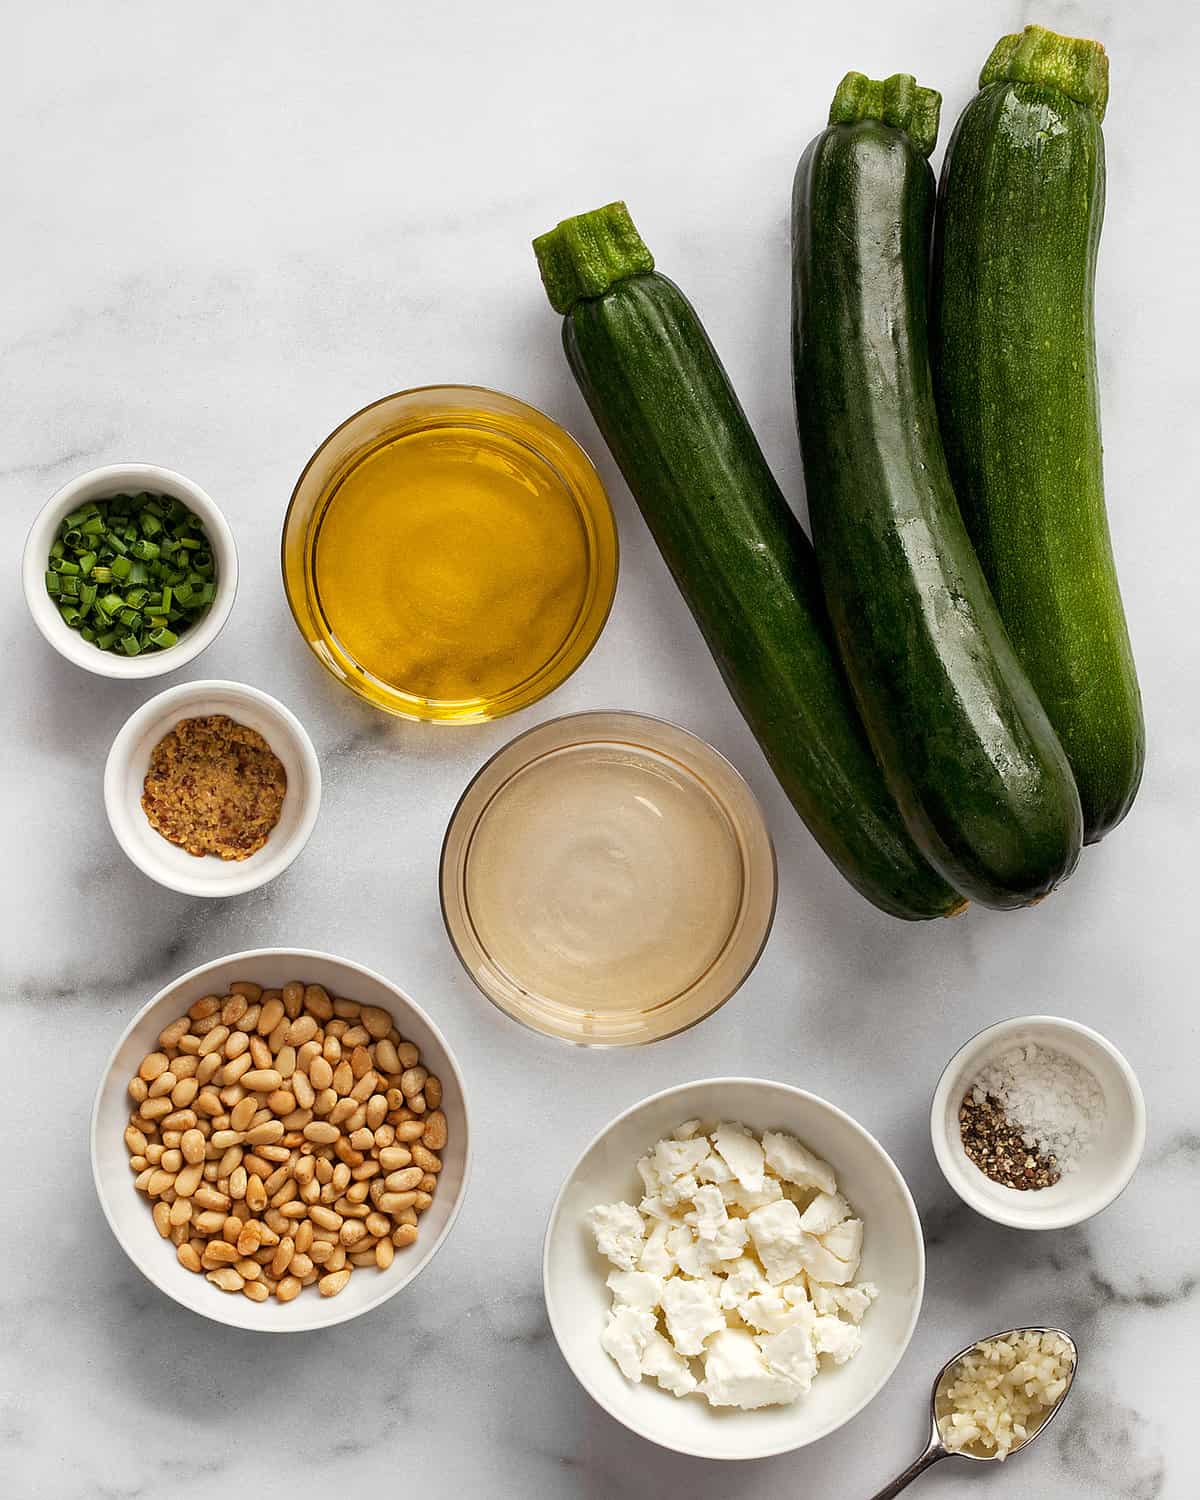 Ingredients including zucchini, feta, pine nuts, olive oil, white wine vinegar and herbs.